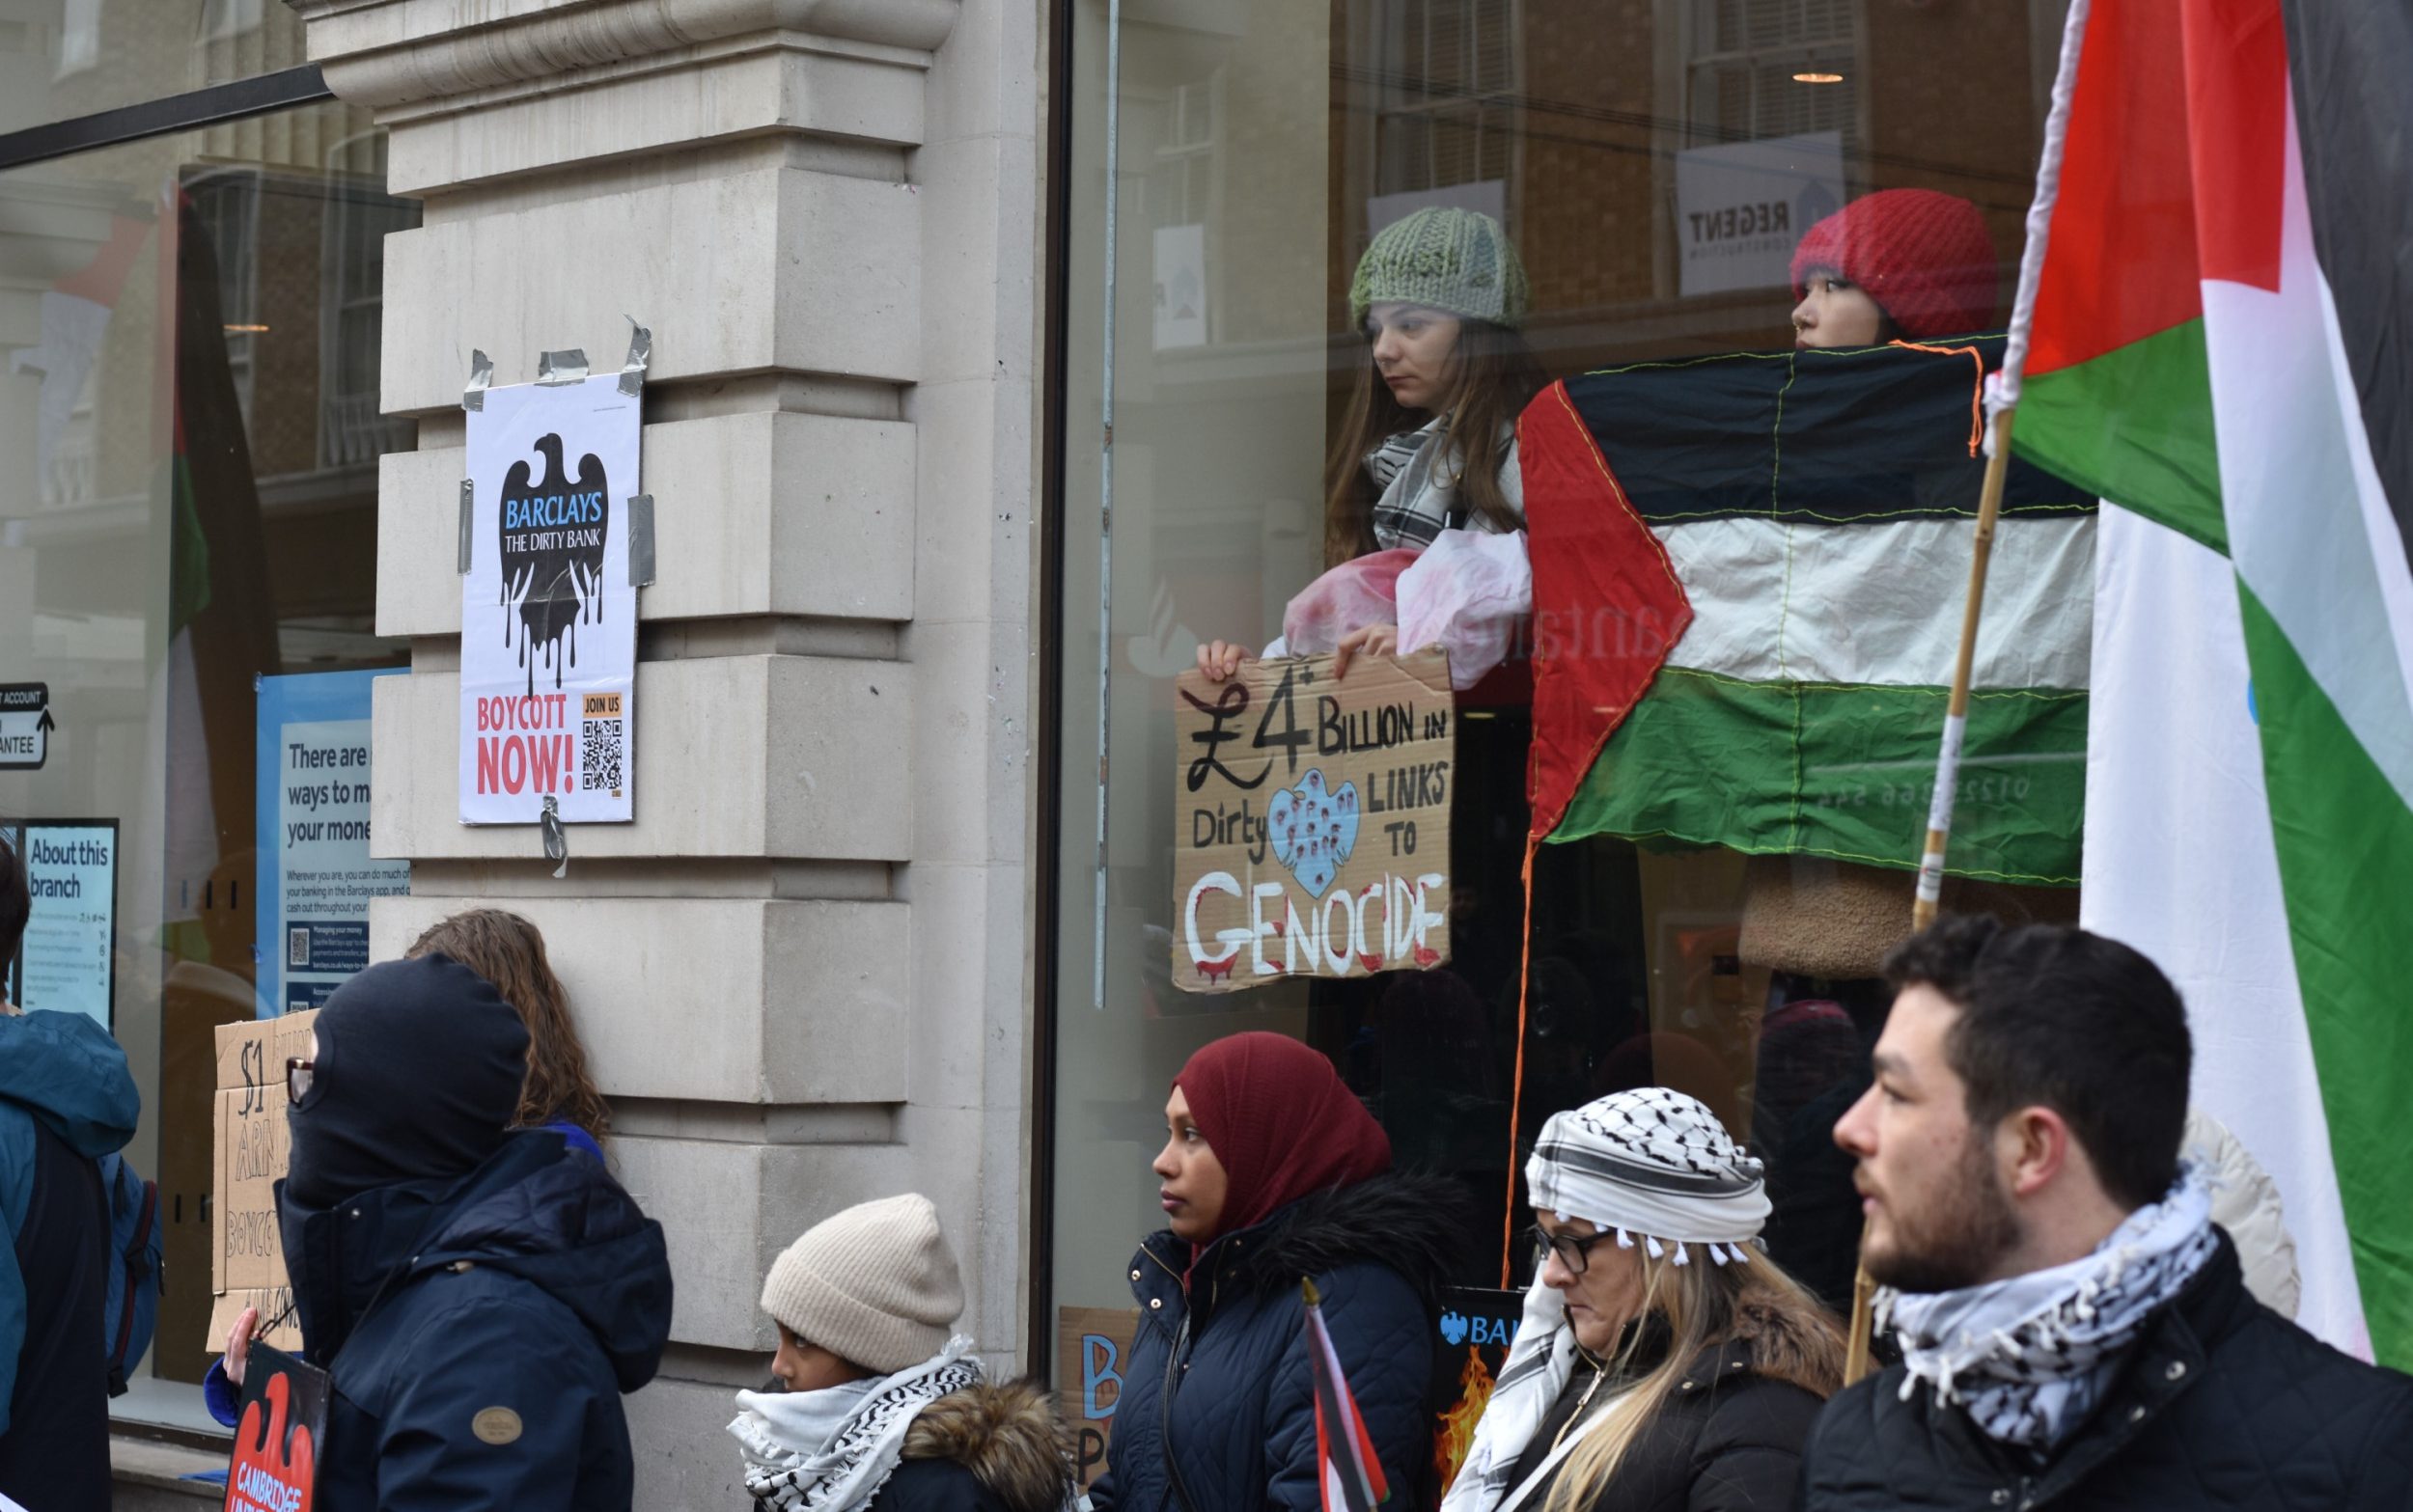 cambridge students stage ‘die-in’ at barclays bank to protest against israel and fossil fuels